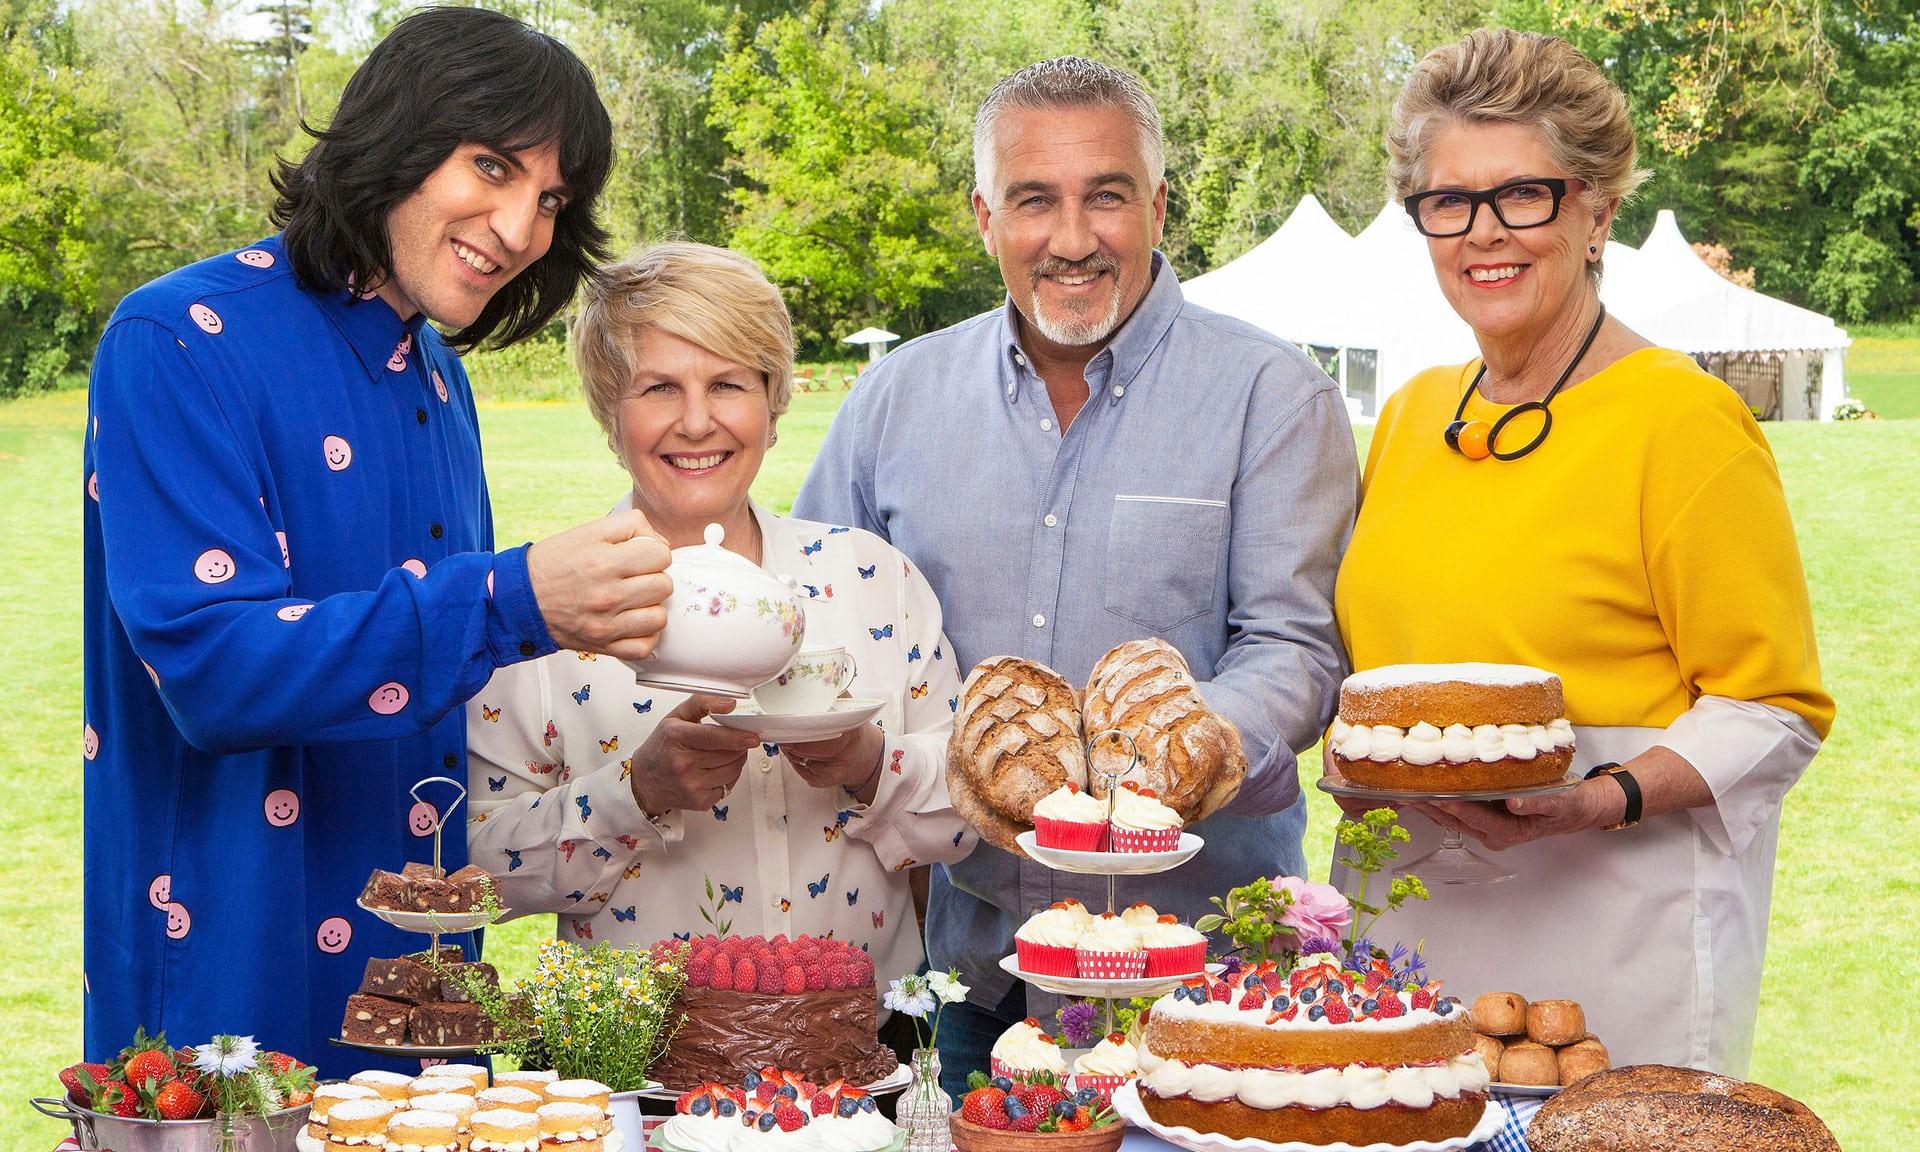 The new Bake Off hosts